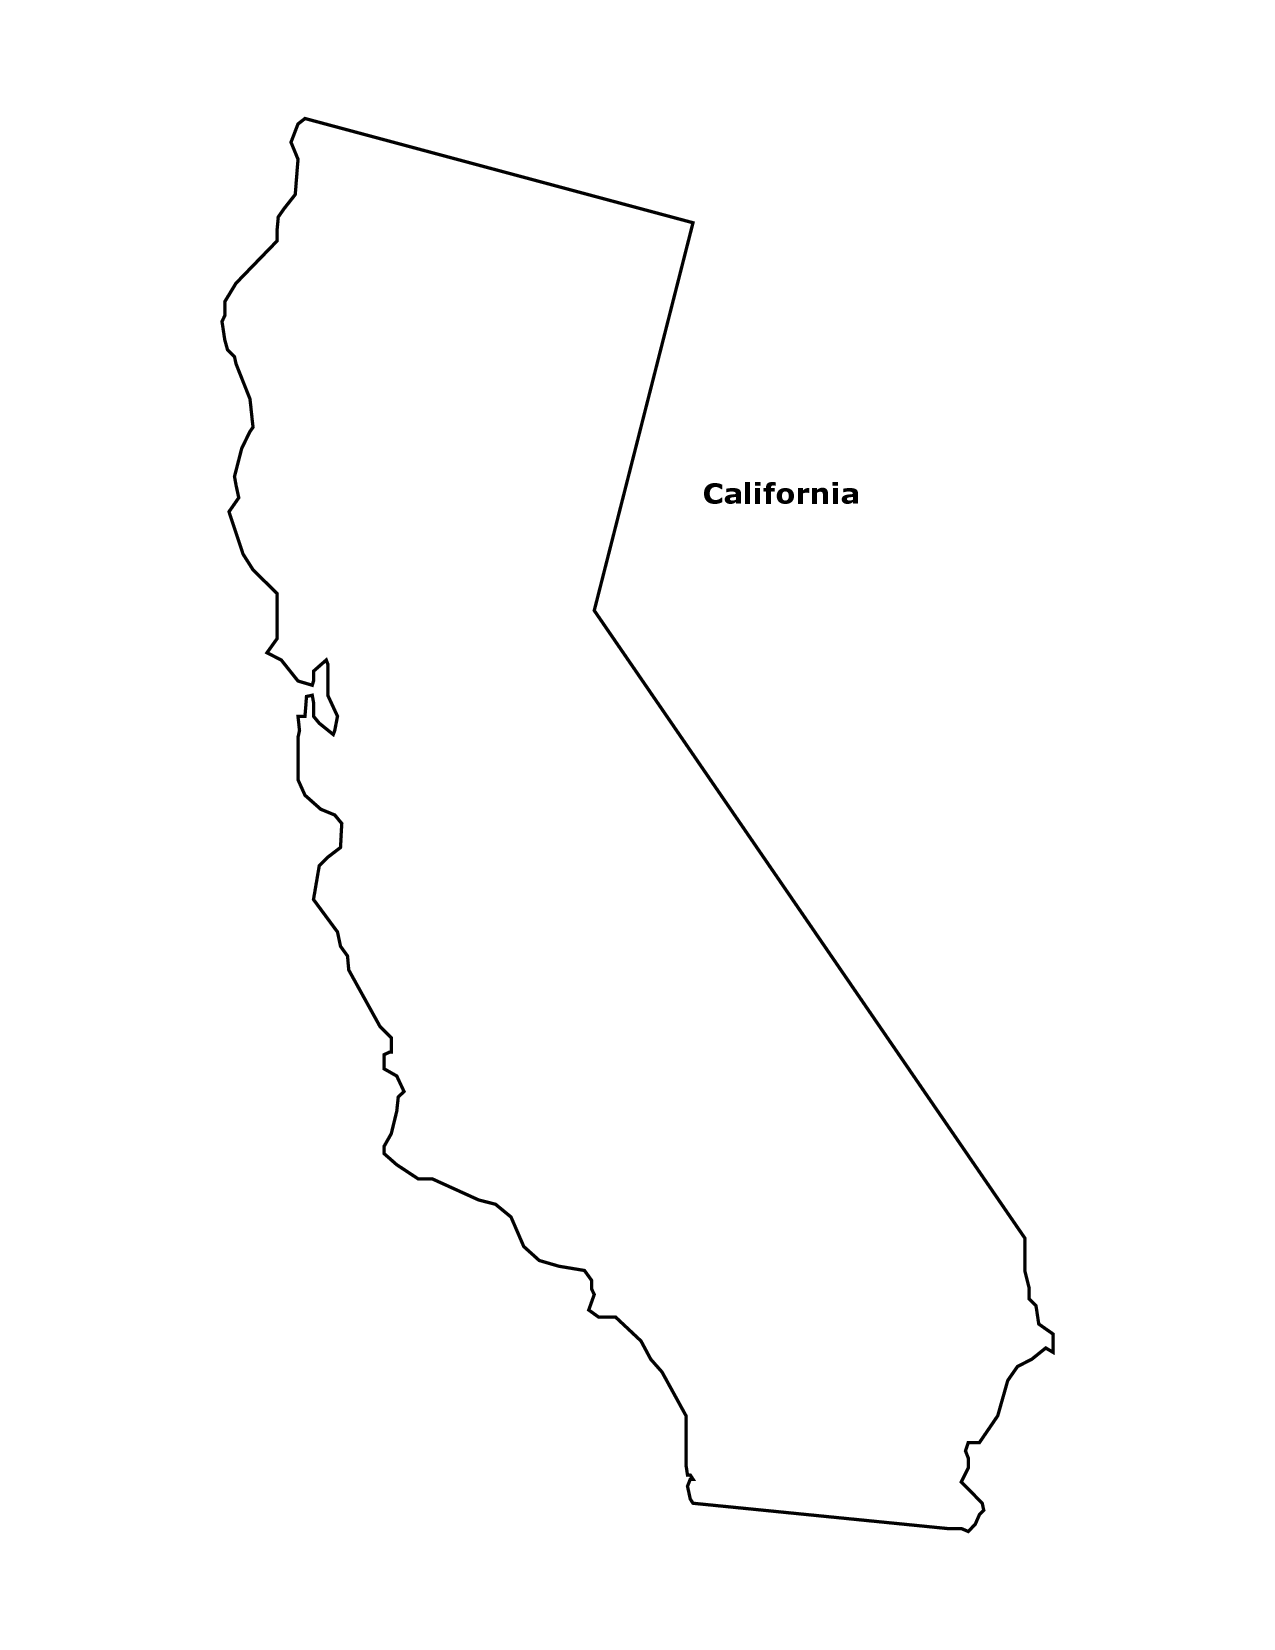 California Map Outline Images  Pictures - Becuo